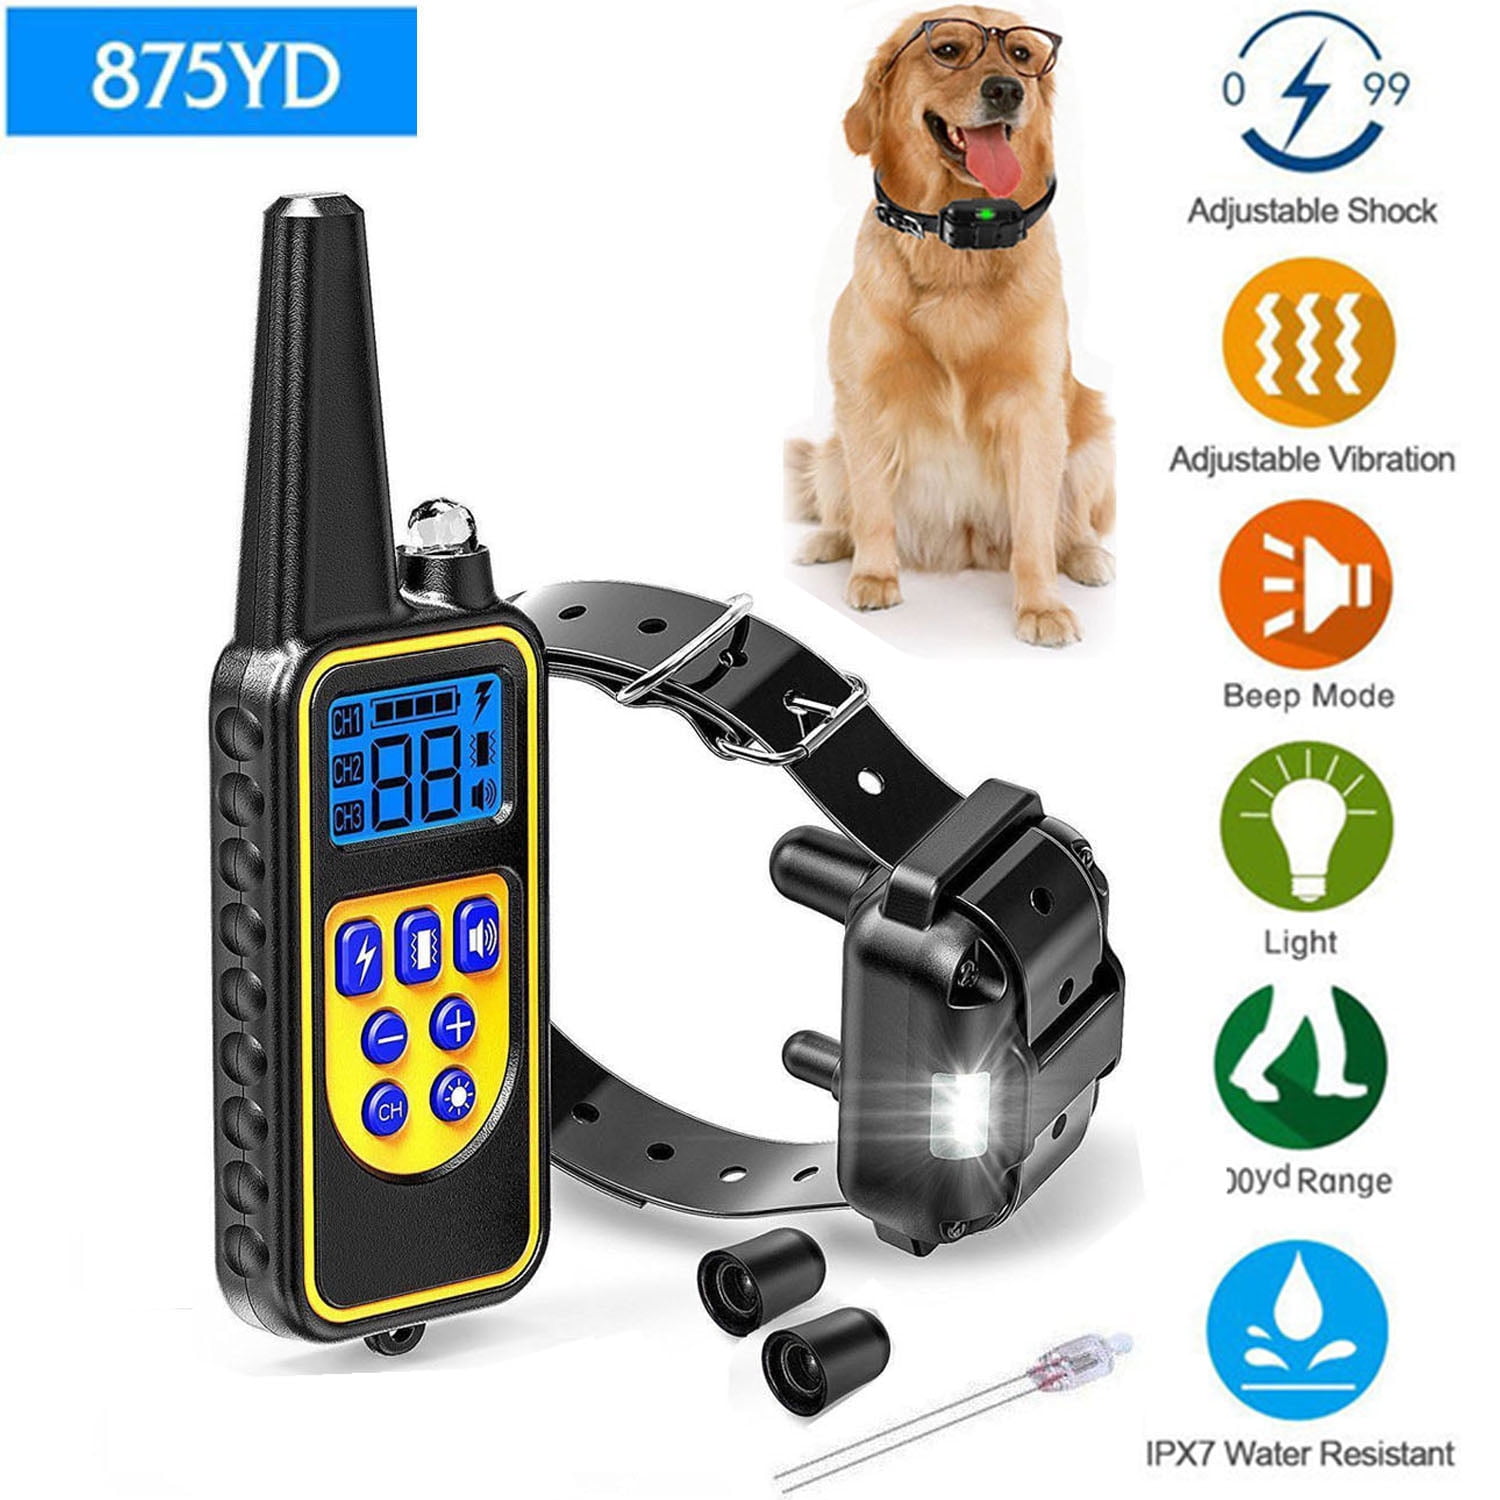 Allenker Shock Collar for Dogs 0~16 Levels Adjustable Dog Training Collar with Remote Dog Shock Collar with Remote up to 2600Ft Range 100% Waterproof with Beep Vibration Static Shock